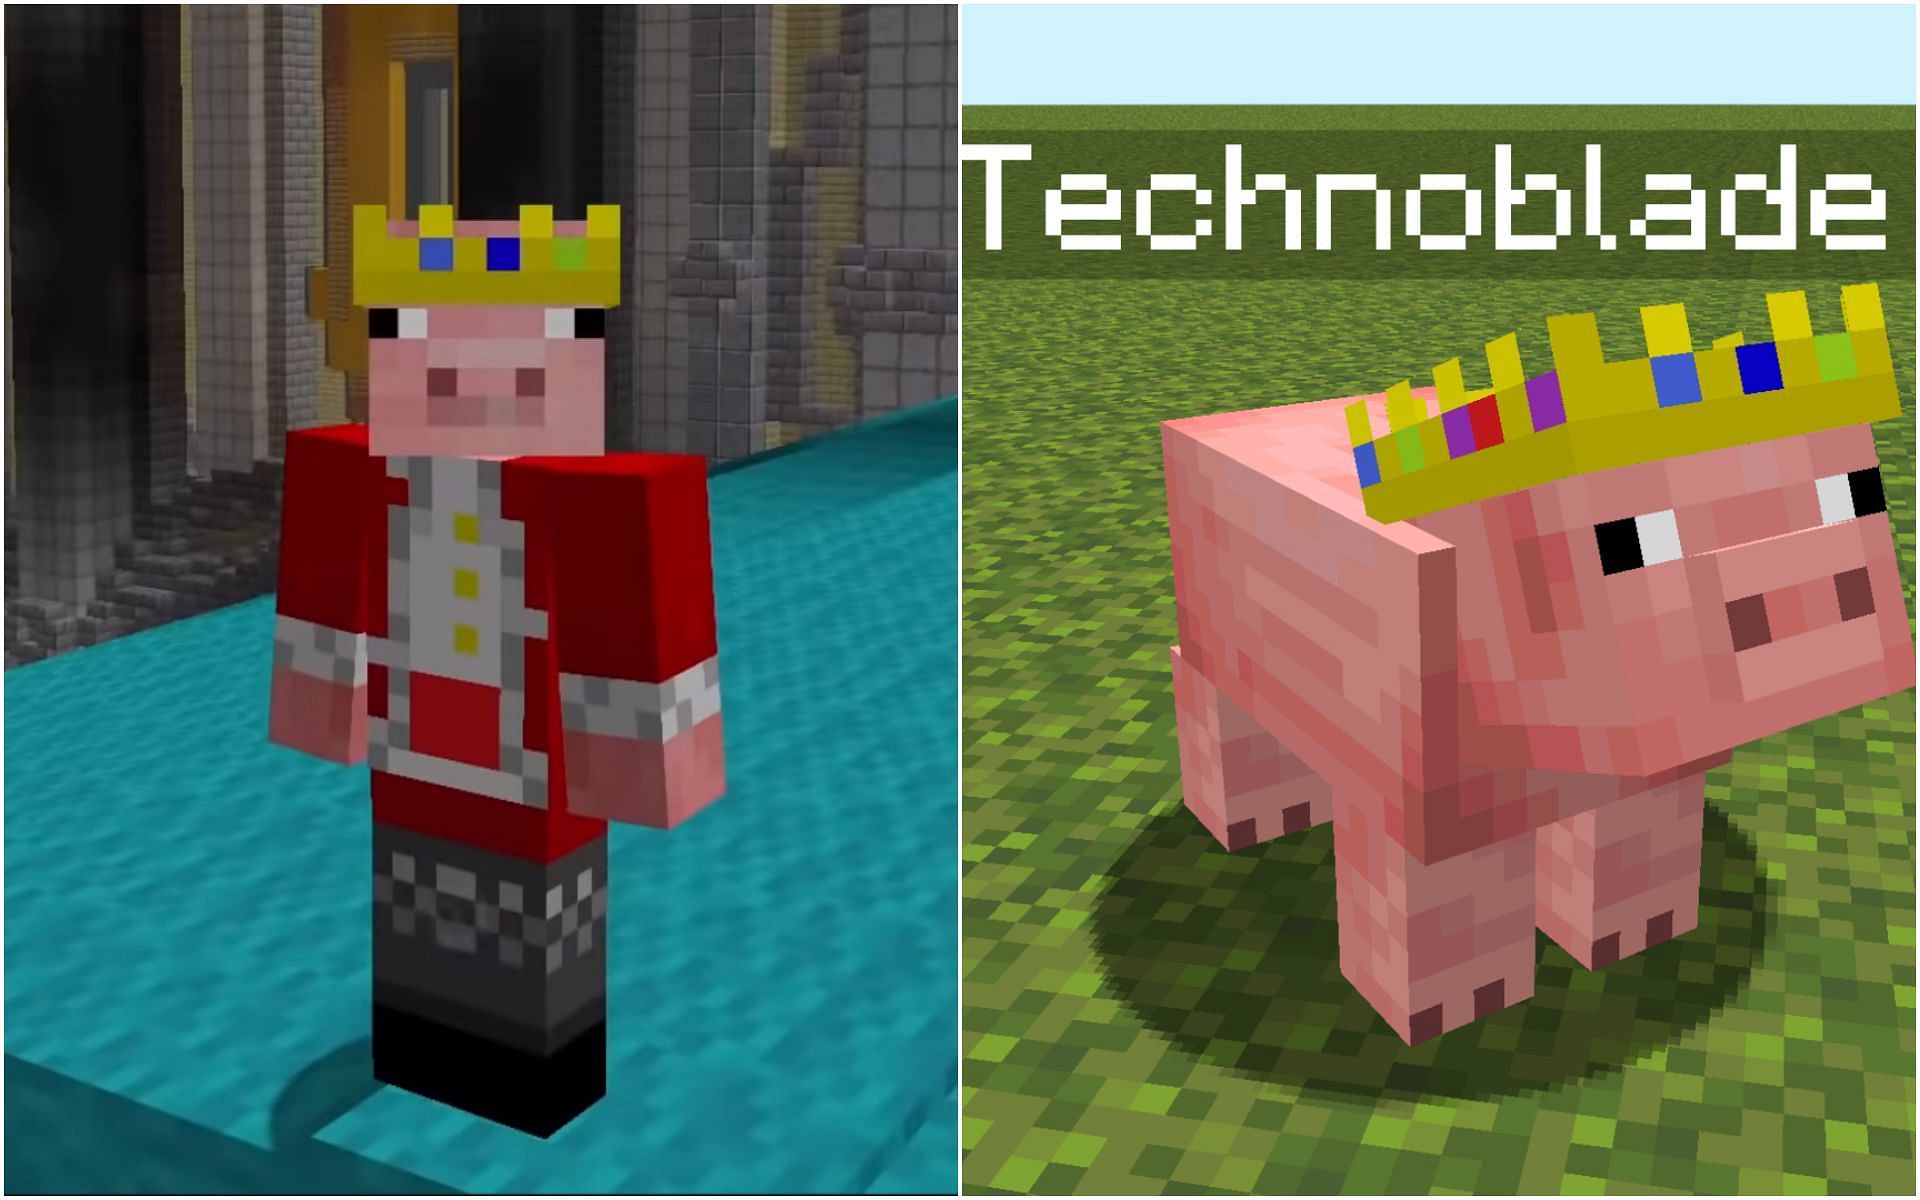 Minecraft adds tribute to Technoblade after streamer's death - The